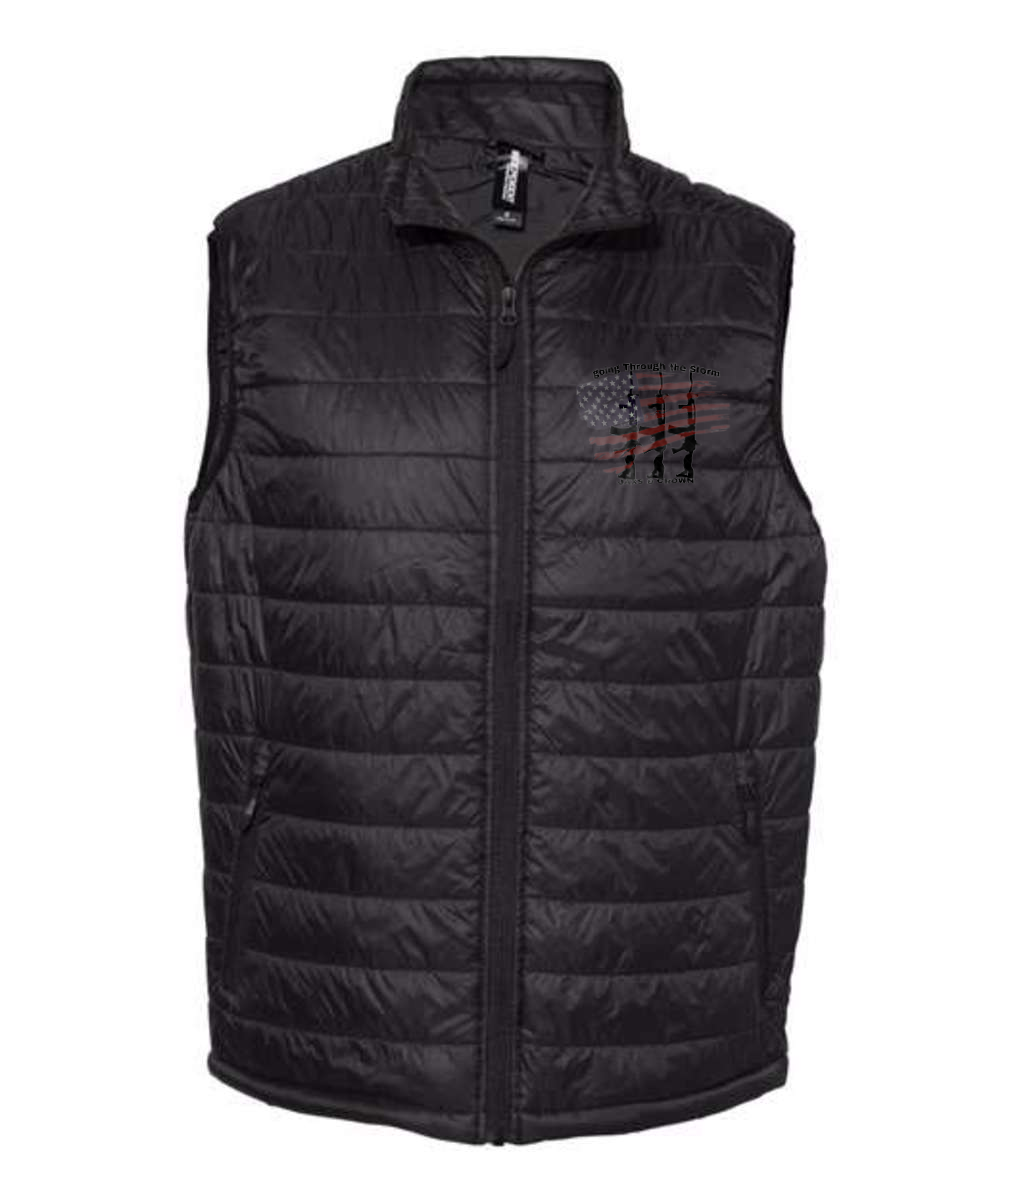 Jaxs & crown gtts Embroidered Independent Trading Co. - Puffer Vest or Similar